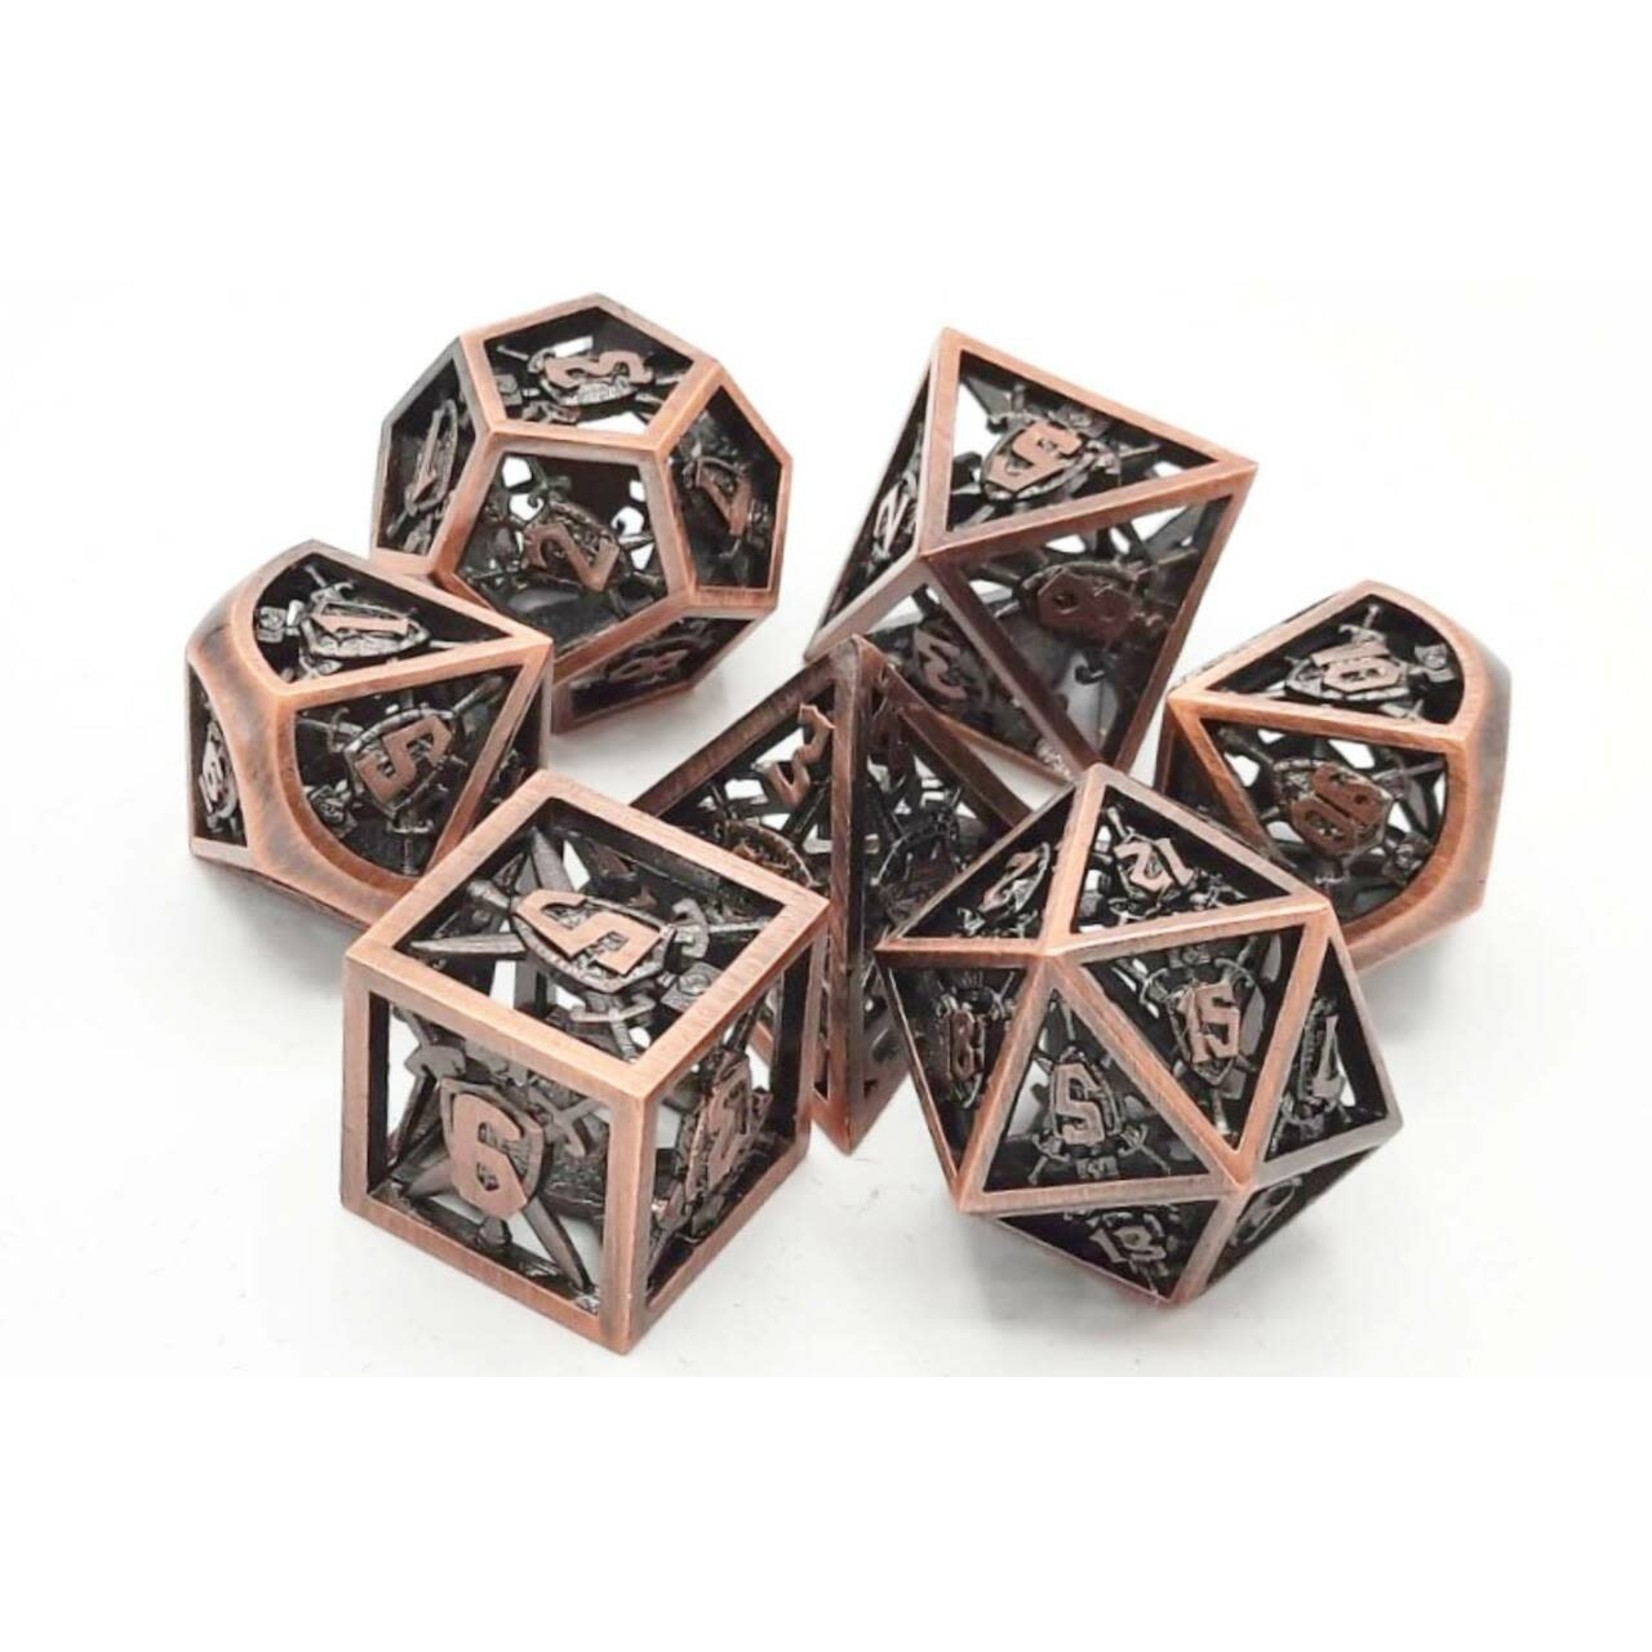 Old School 7 Piece Dice Set: Hollow Sword and Shield Dice - Brushed Copper